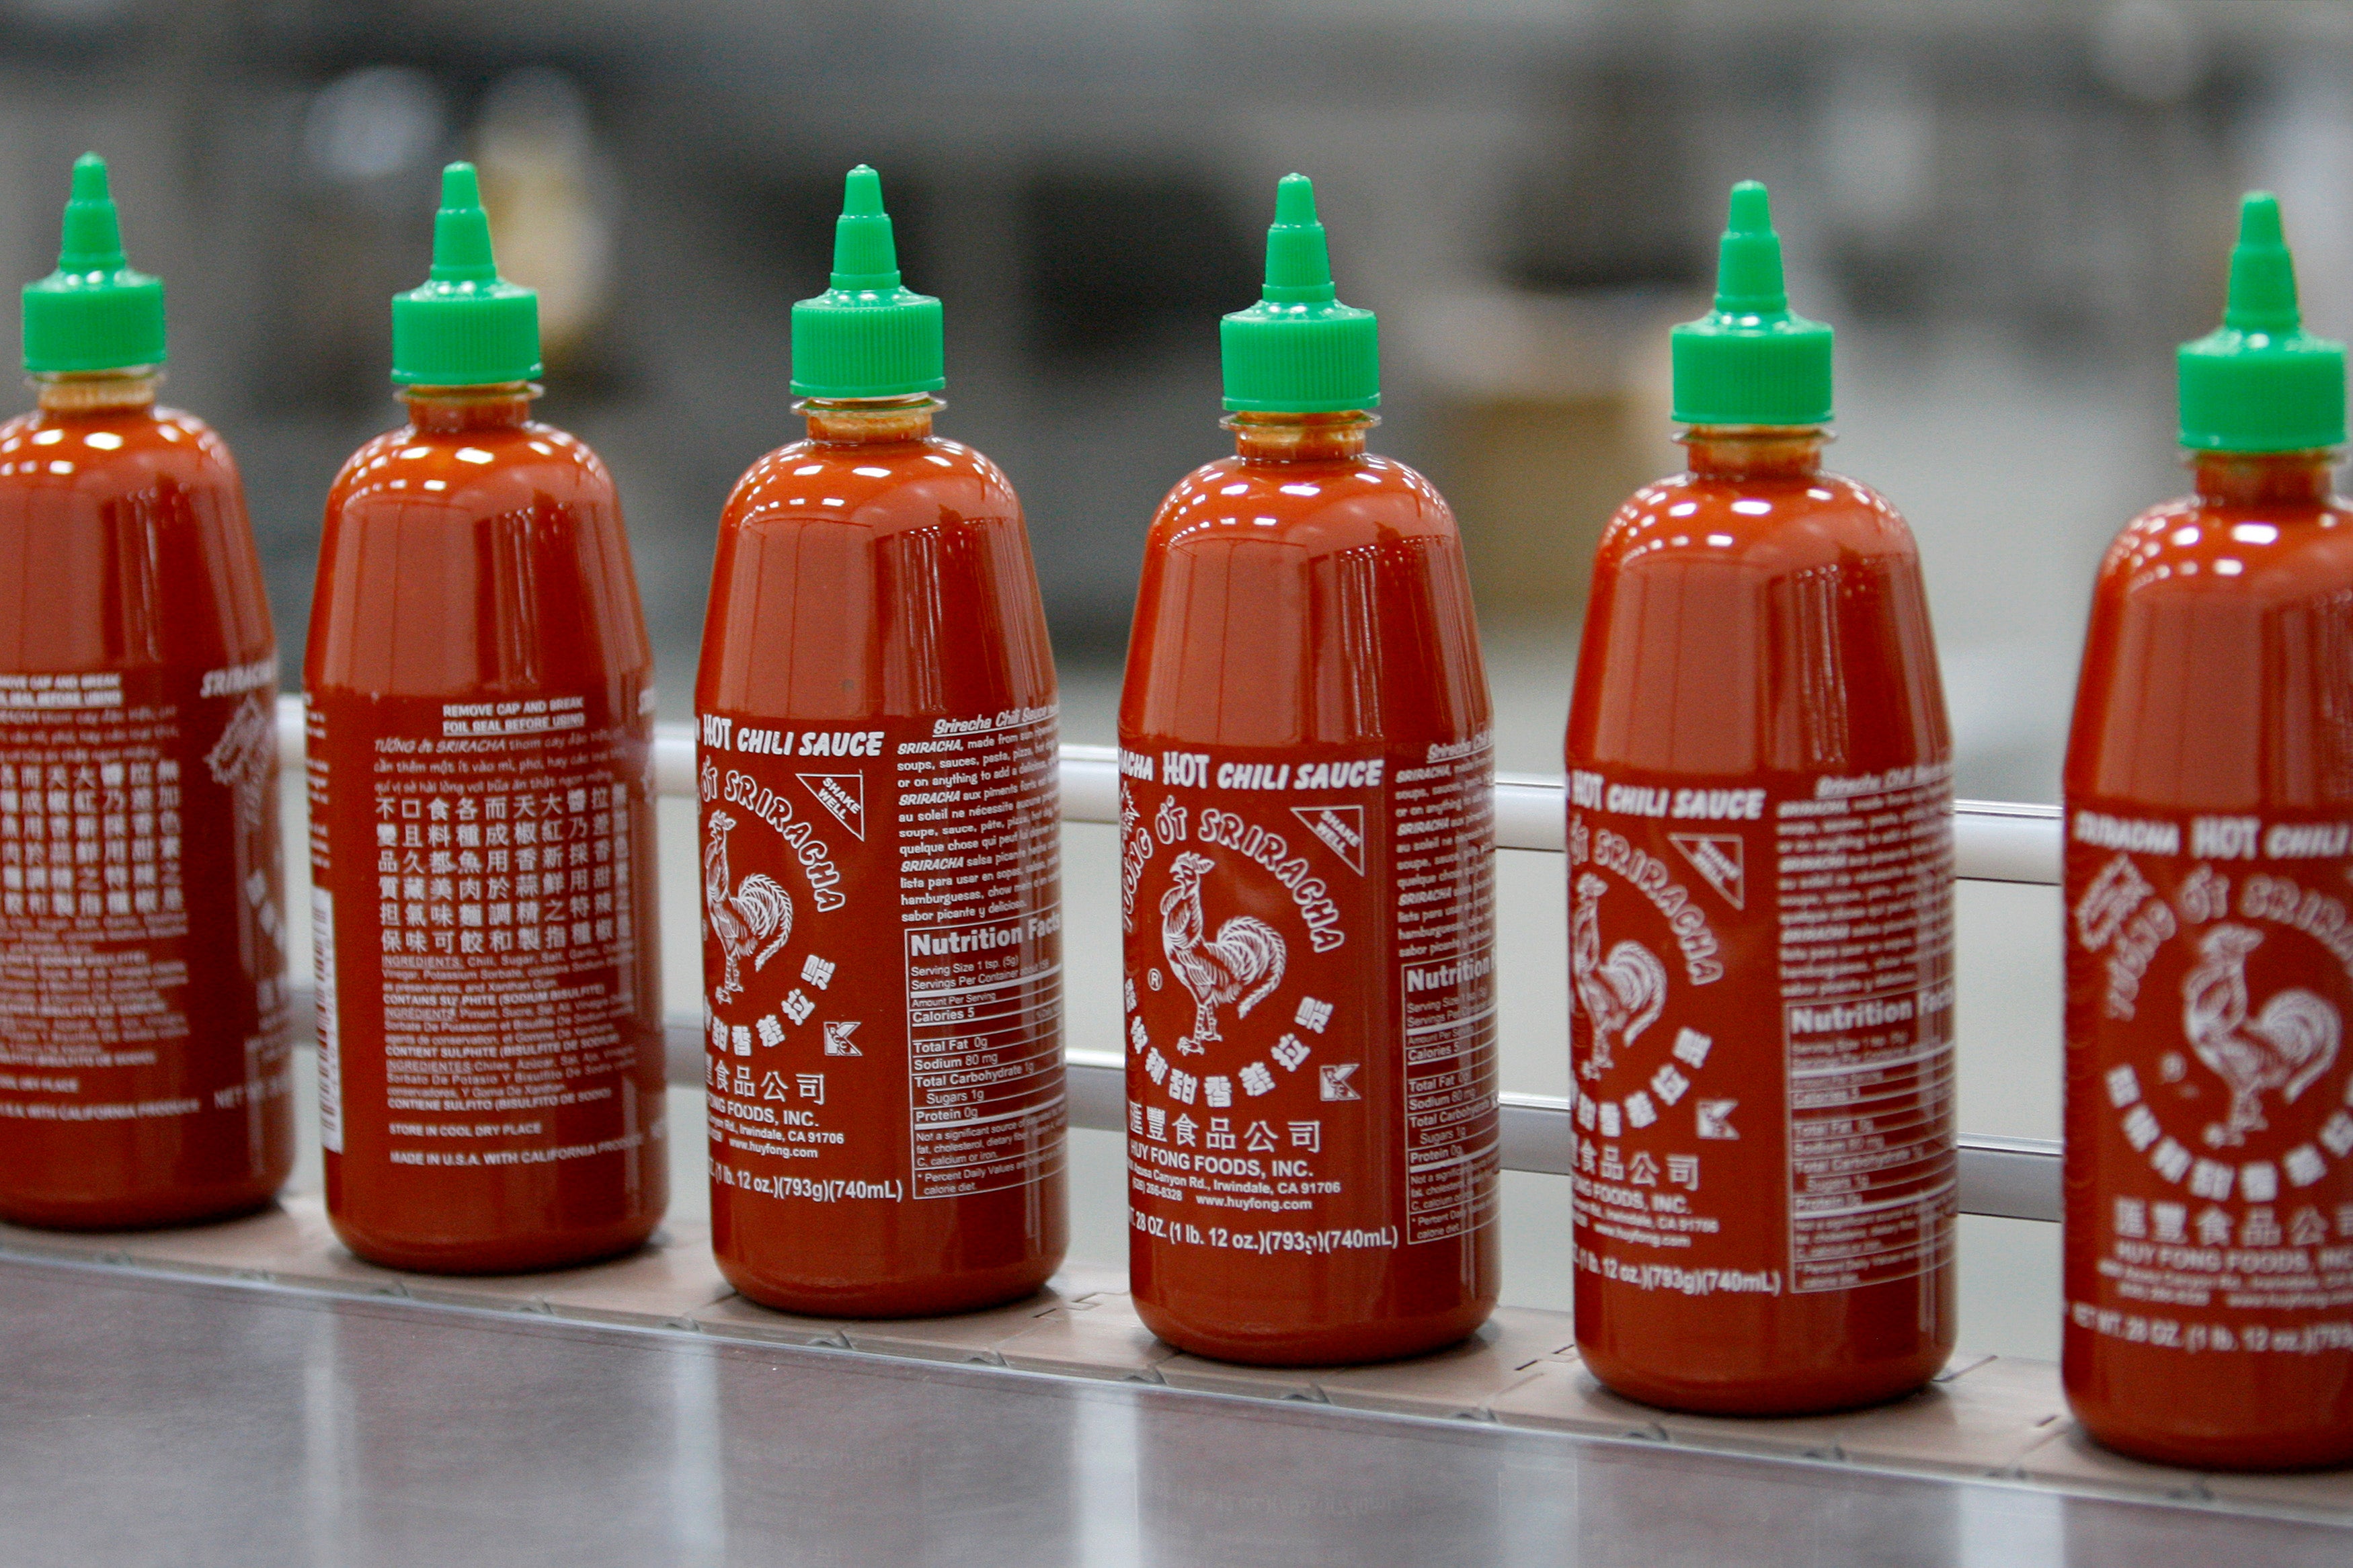 Sriracha hot sauce production suspended due to climate crisis The